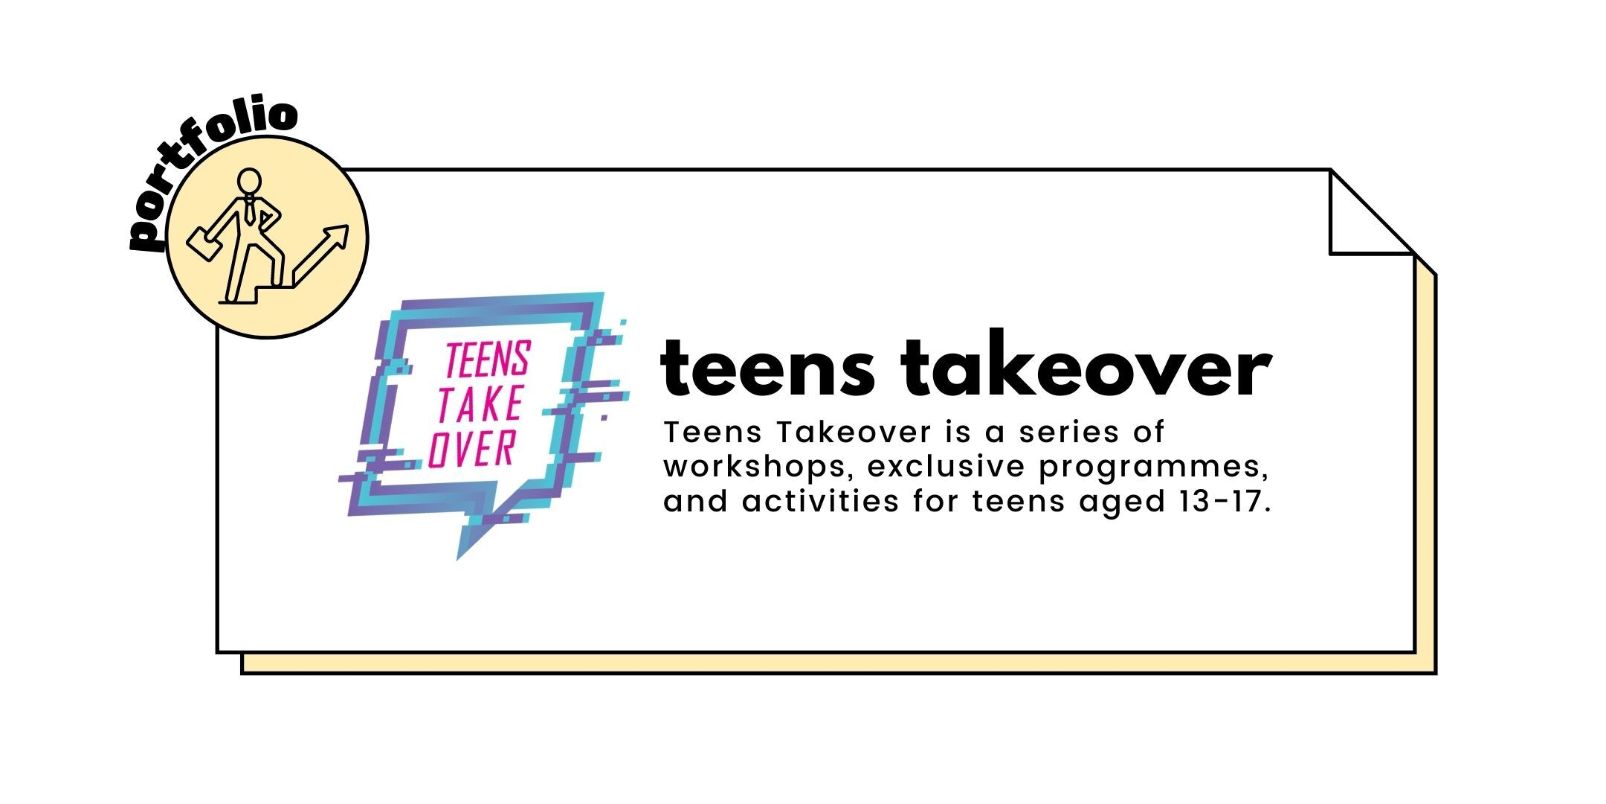 Teens Takeover